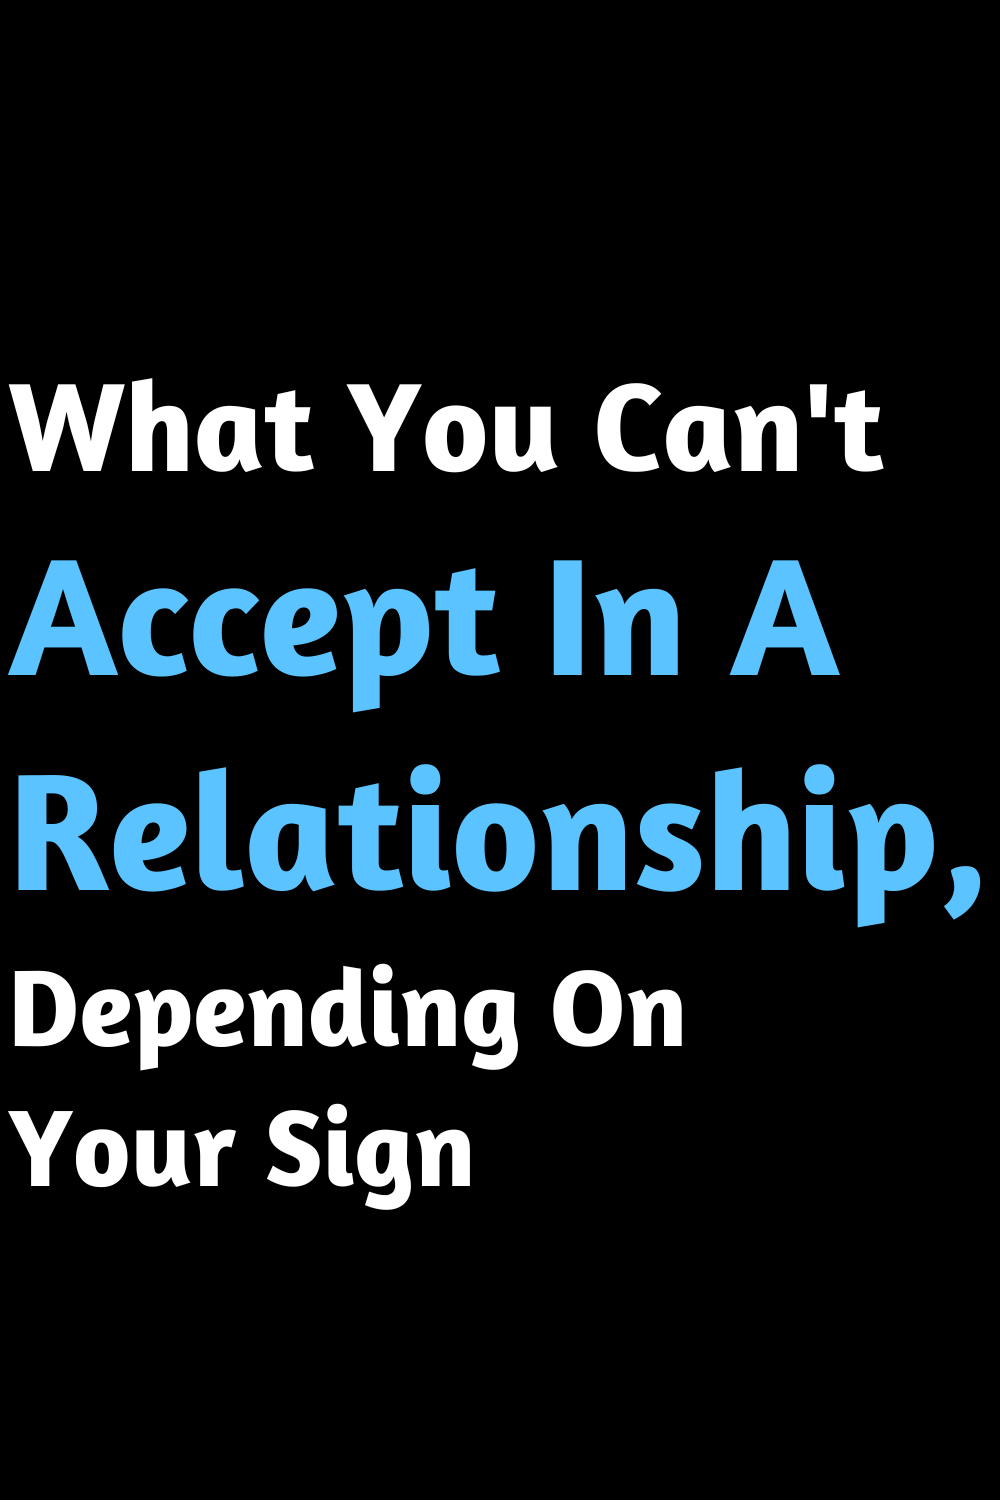 What You Can't Accept In A Relationship, Depending On Your Sign